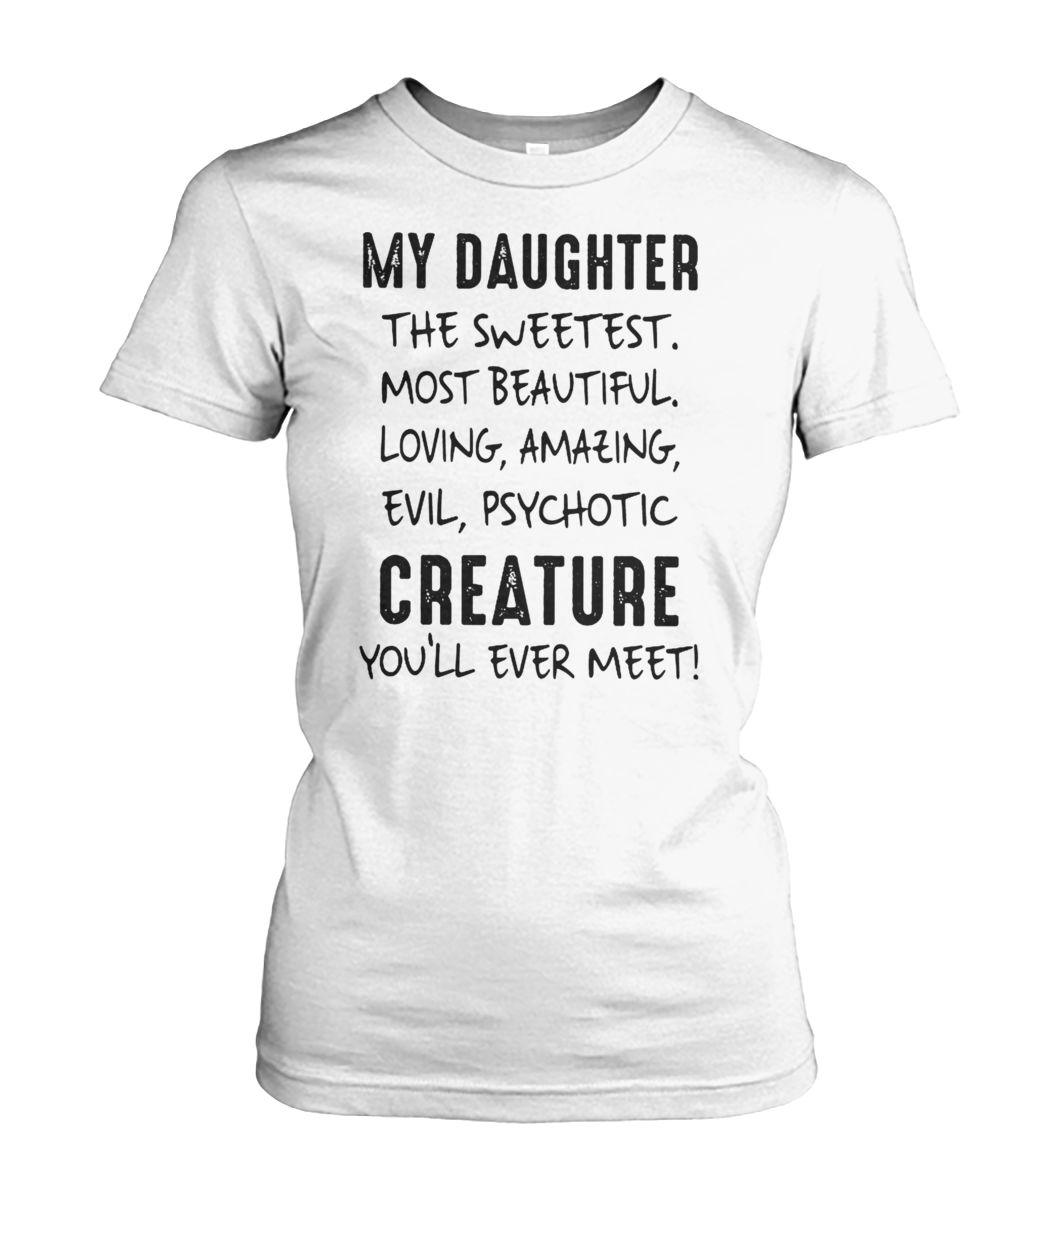 My daughter the sweetest most beautiful loving amazing evil psychotic creature you'll ever meet women's crew tee